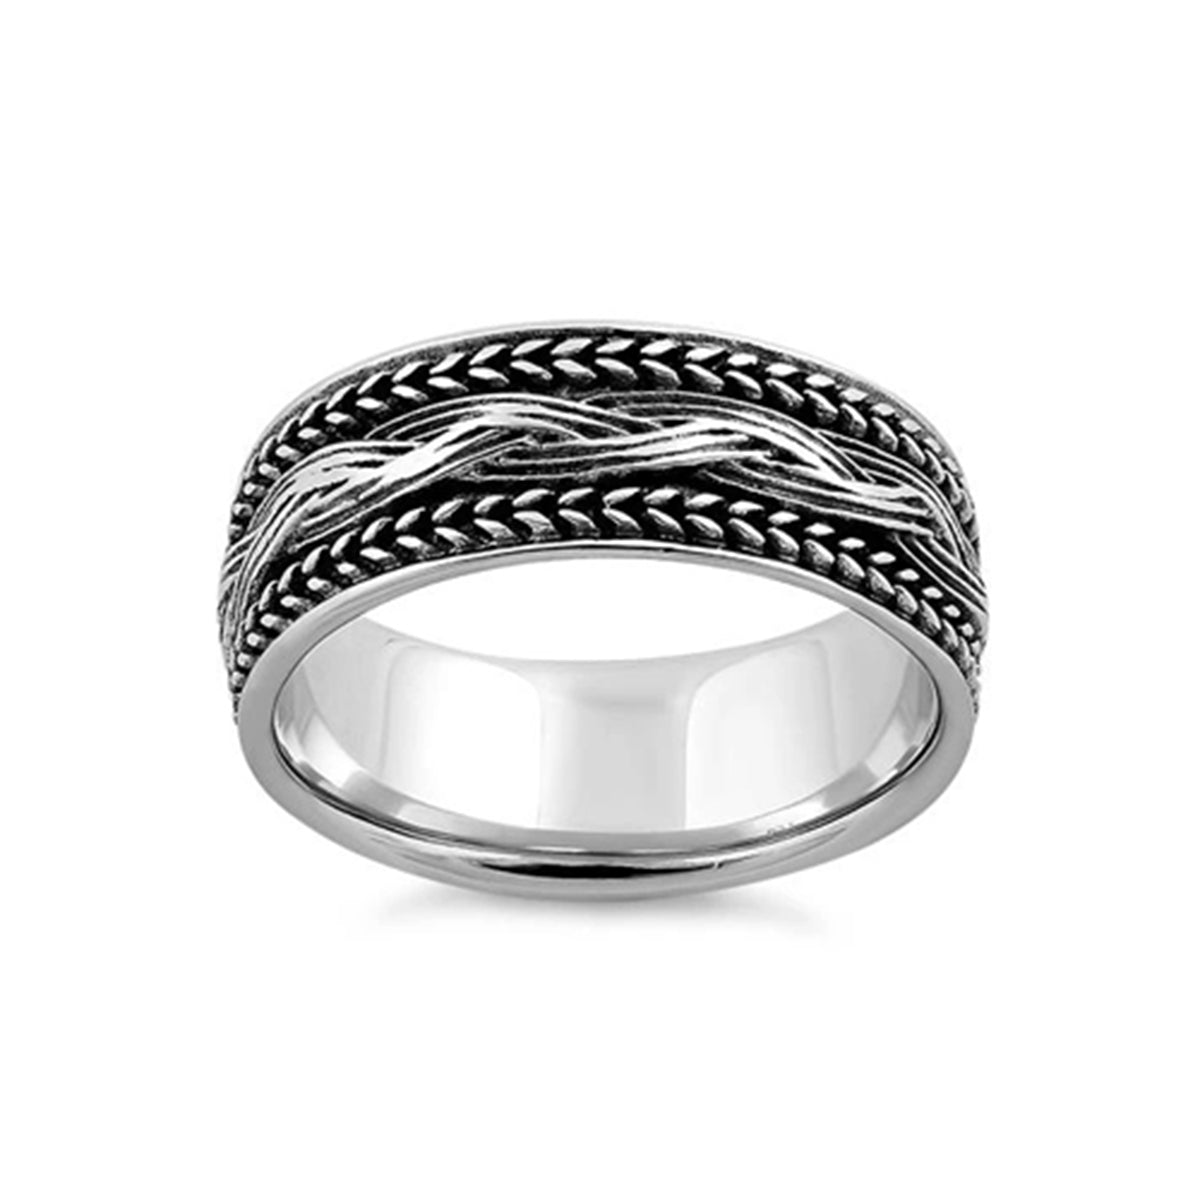 Buy quality 925 sterling silver oxidized fancy designer Big ring for ladies  in Ahmedabad